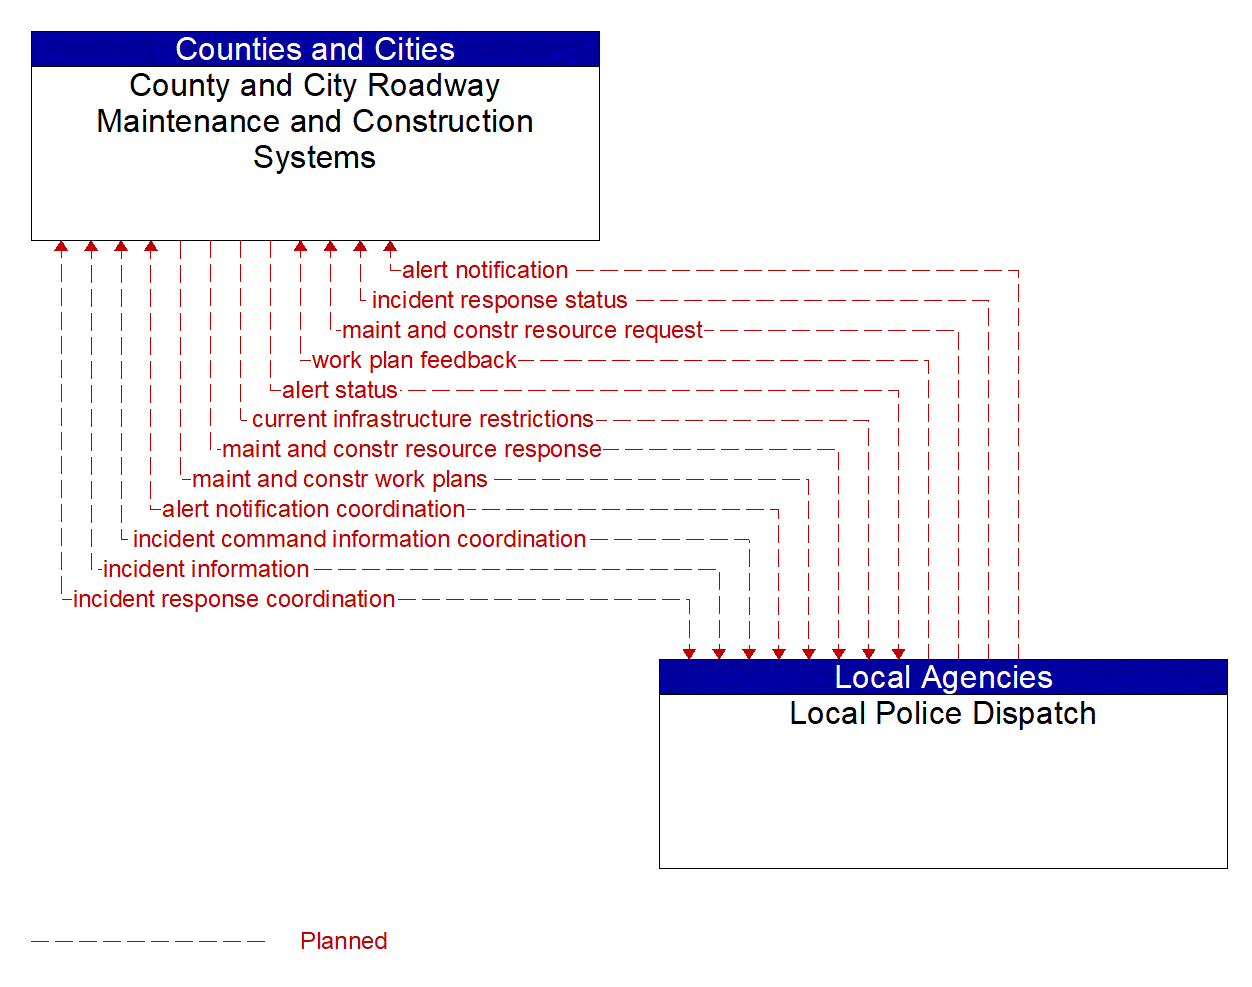 Architecture Flow Diagram: Local Police Dispatch <--> County and City Roadway Maintenance and Construction Systems